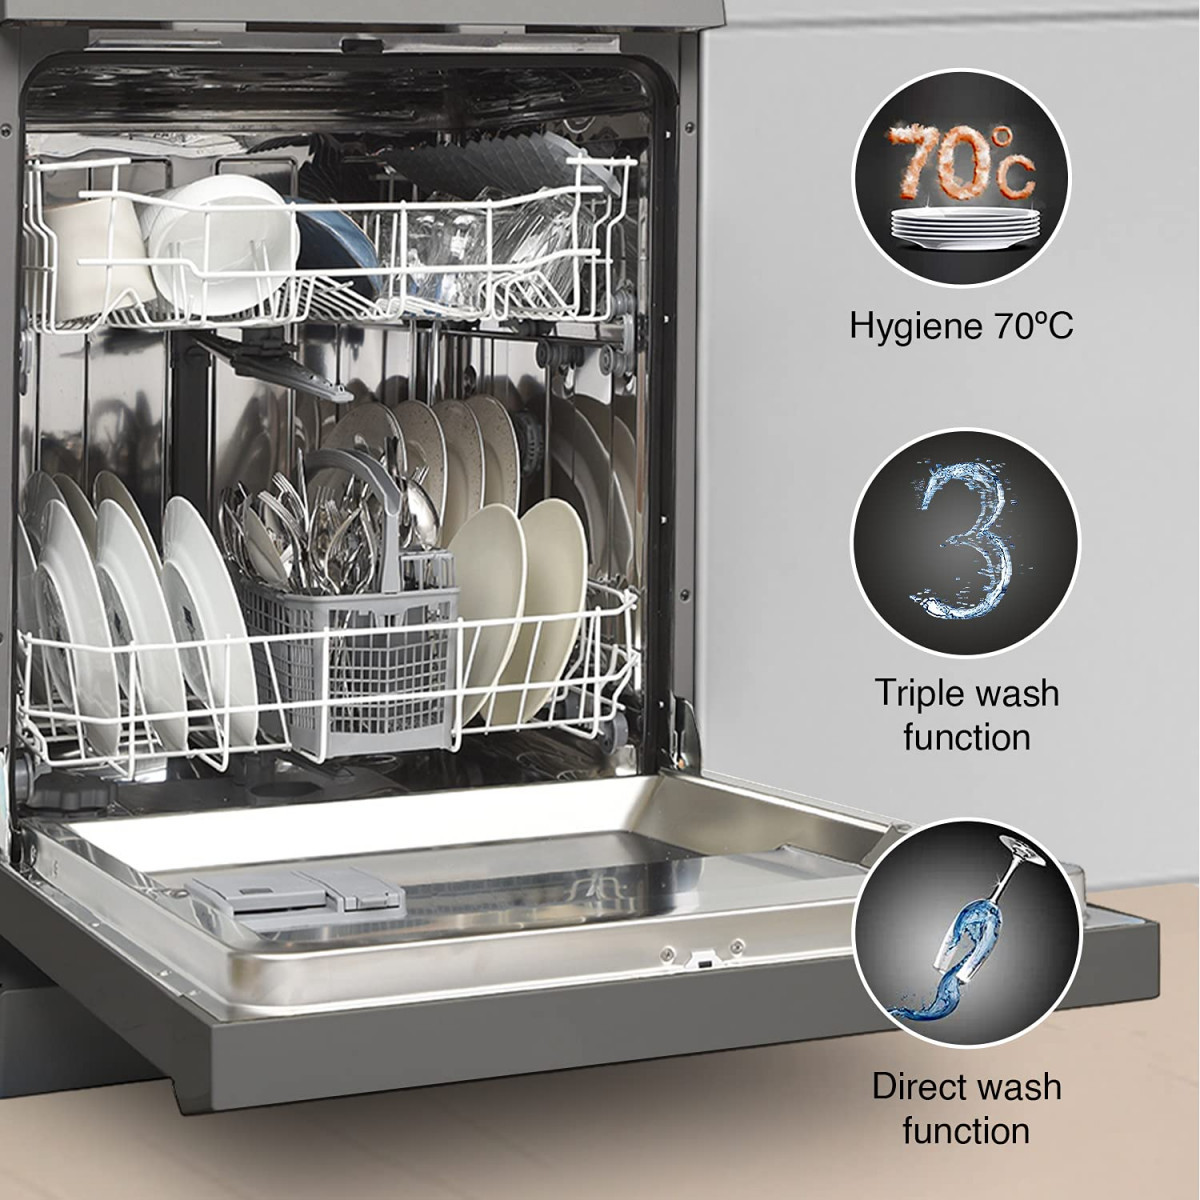 Godrej Eon Dishwasher  Steam Wash Technology 13 place setting  Perfect for Indian Kitchen